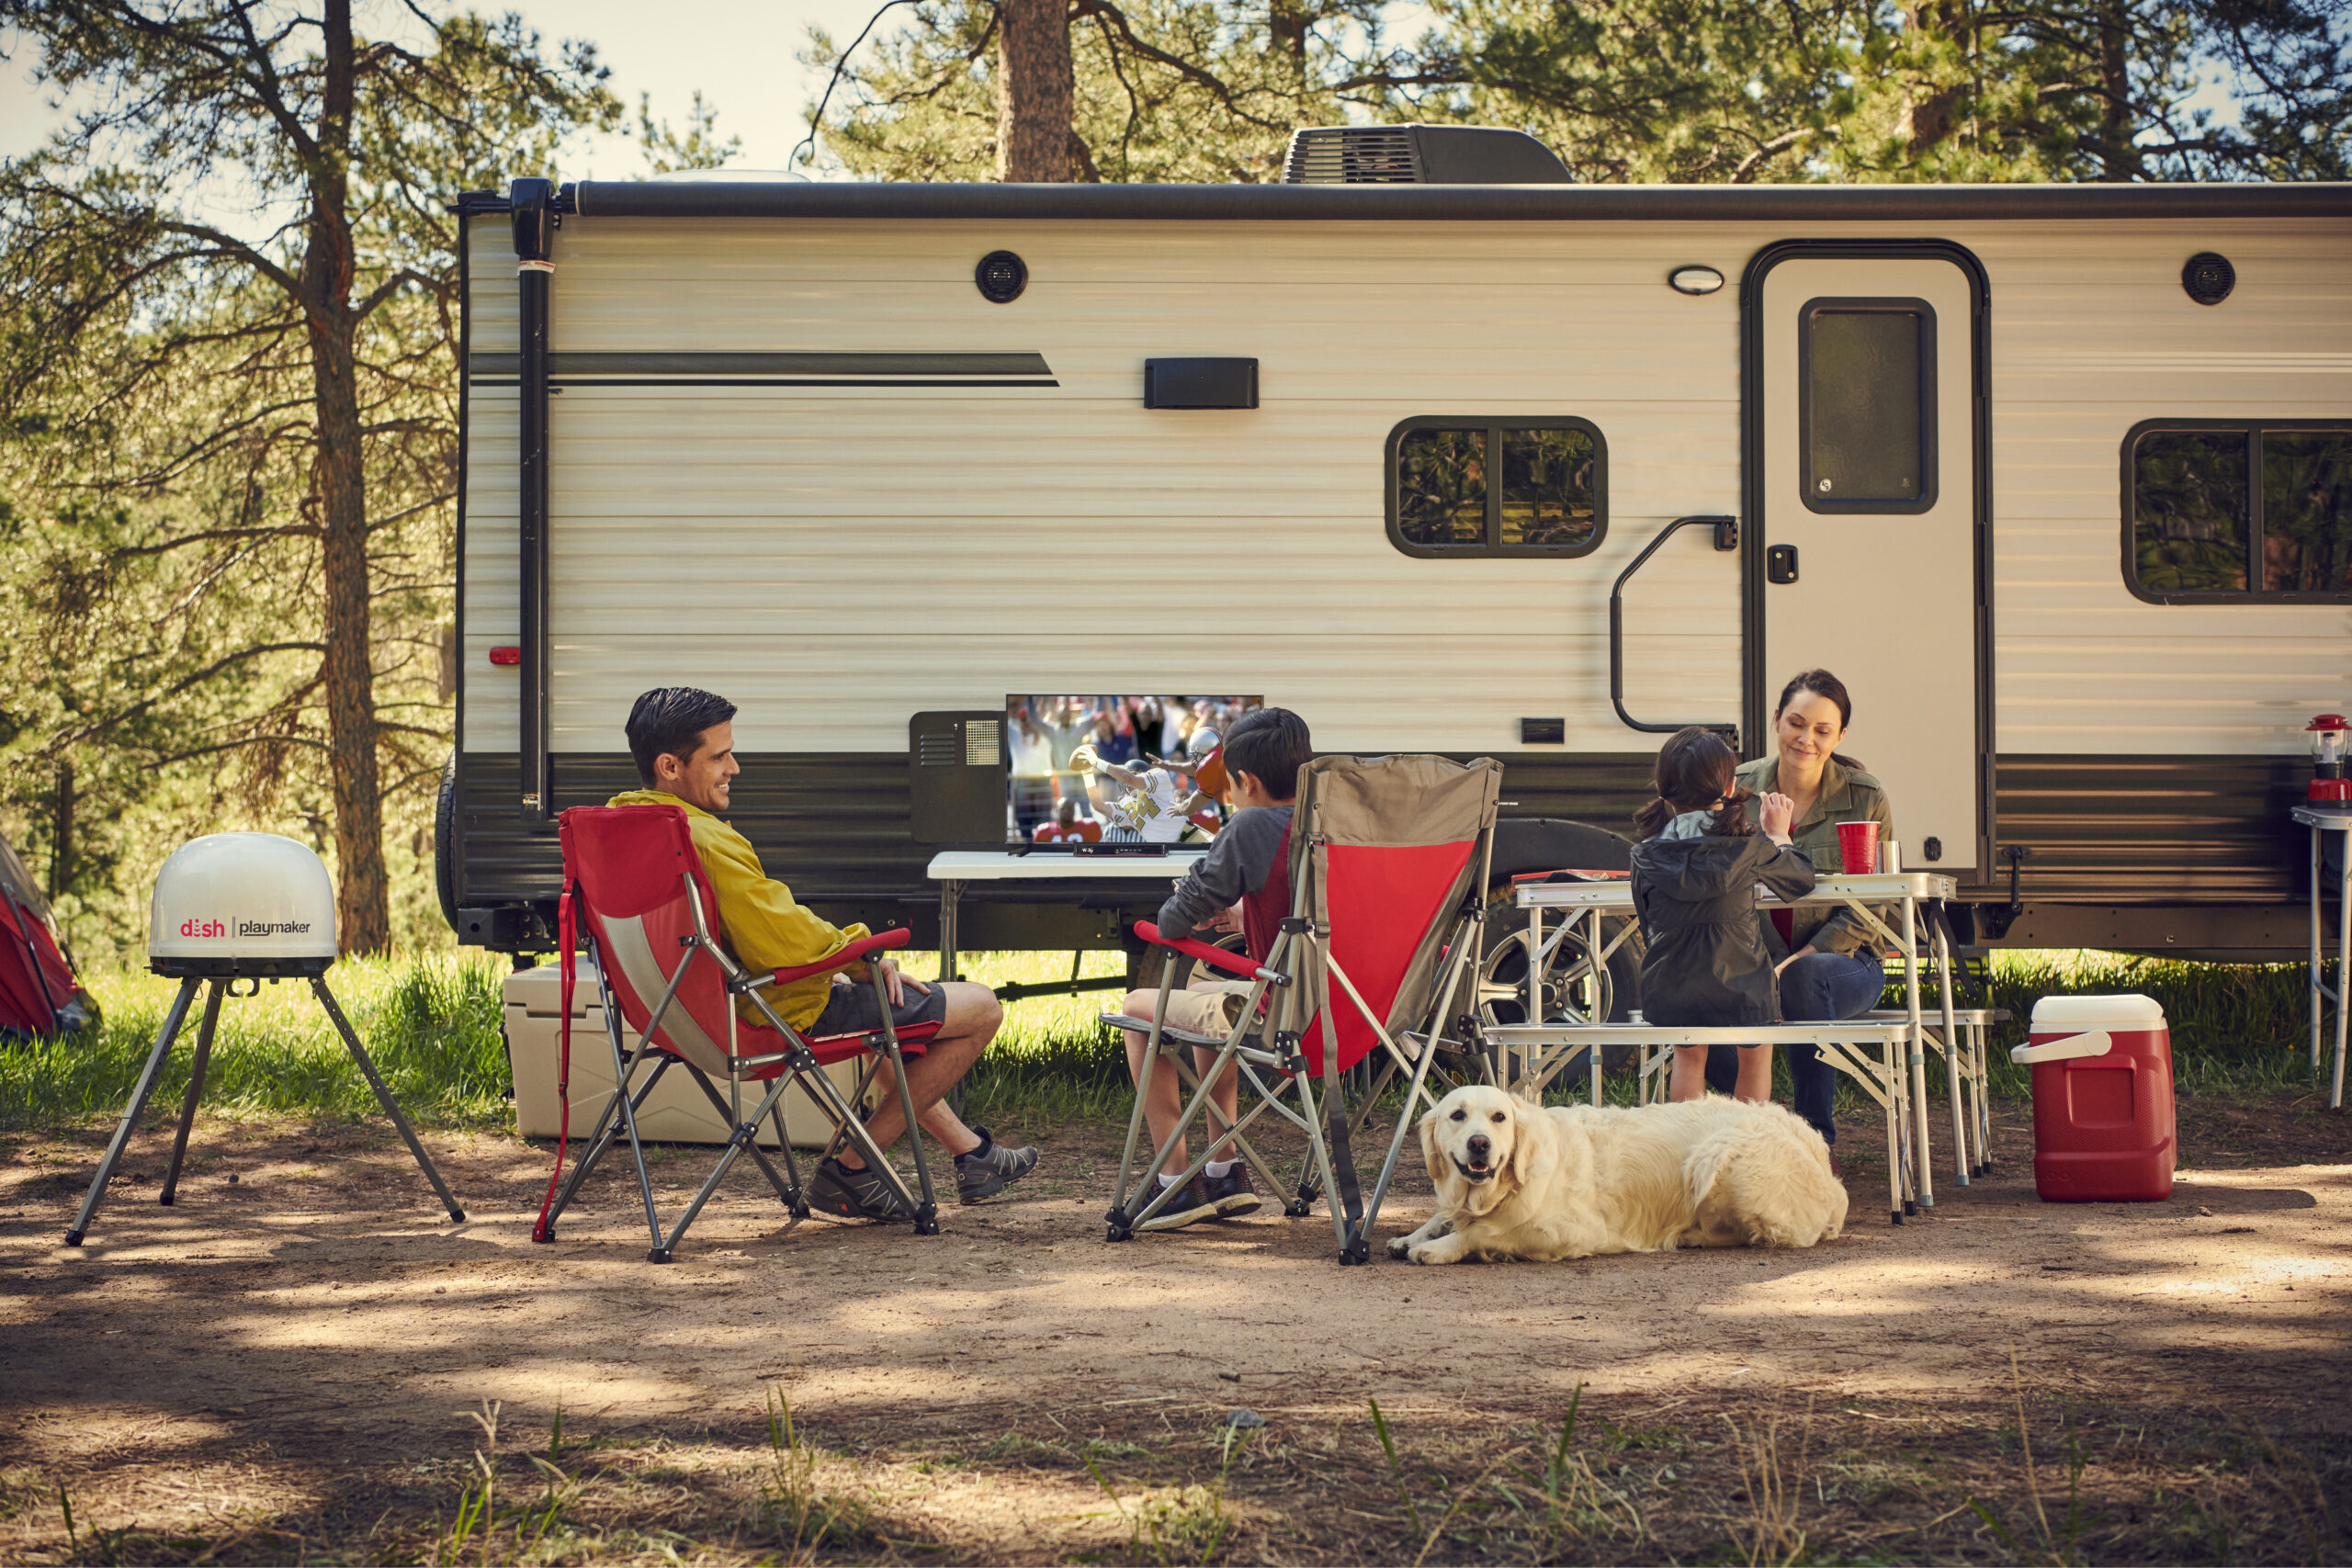 A campsite with people and dogs and a DISH Outdoors and television.